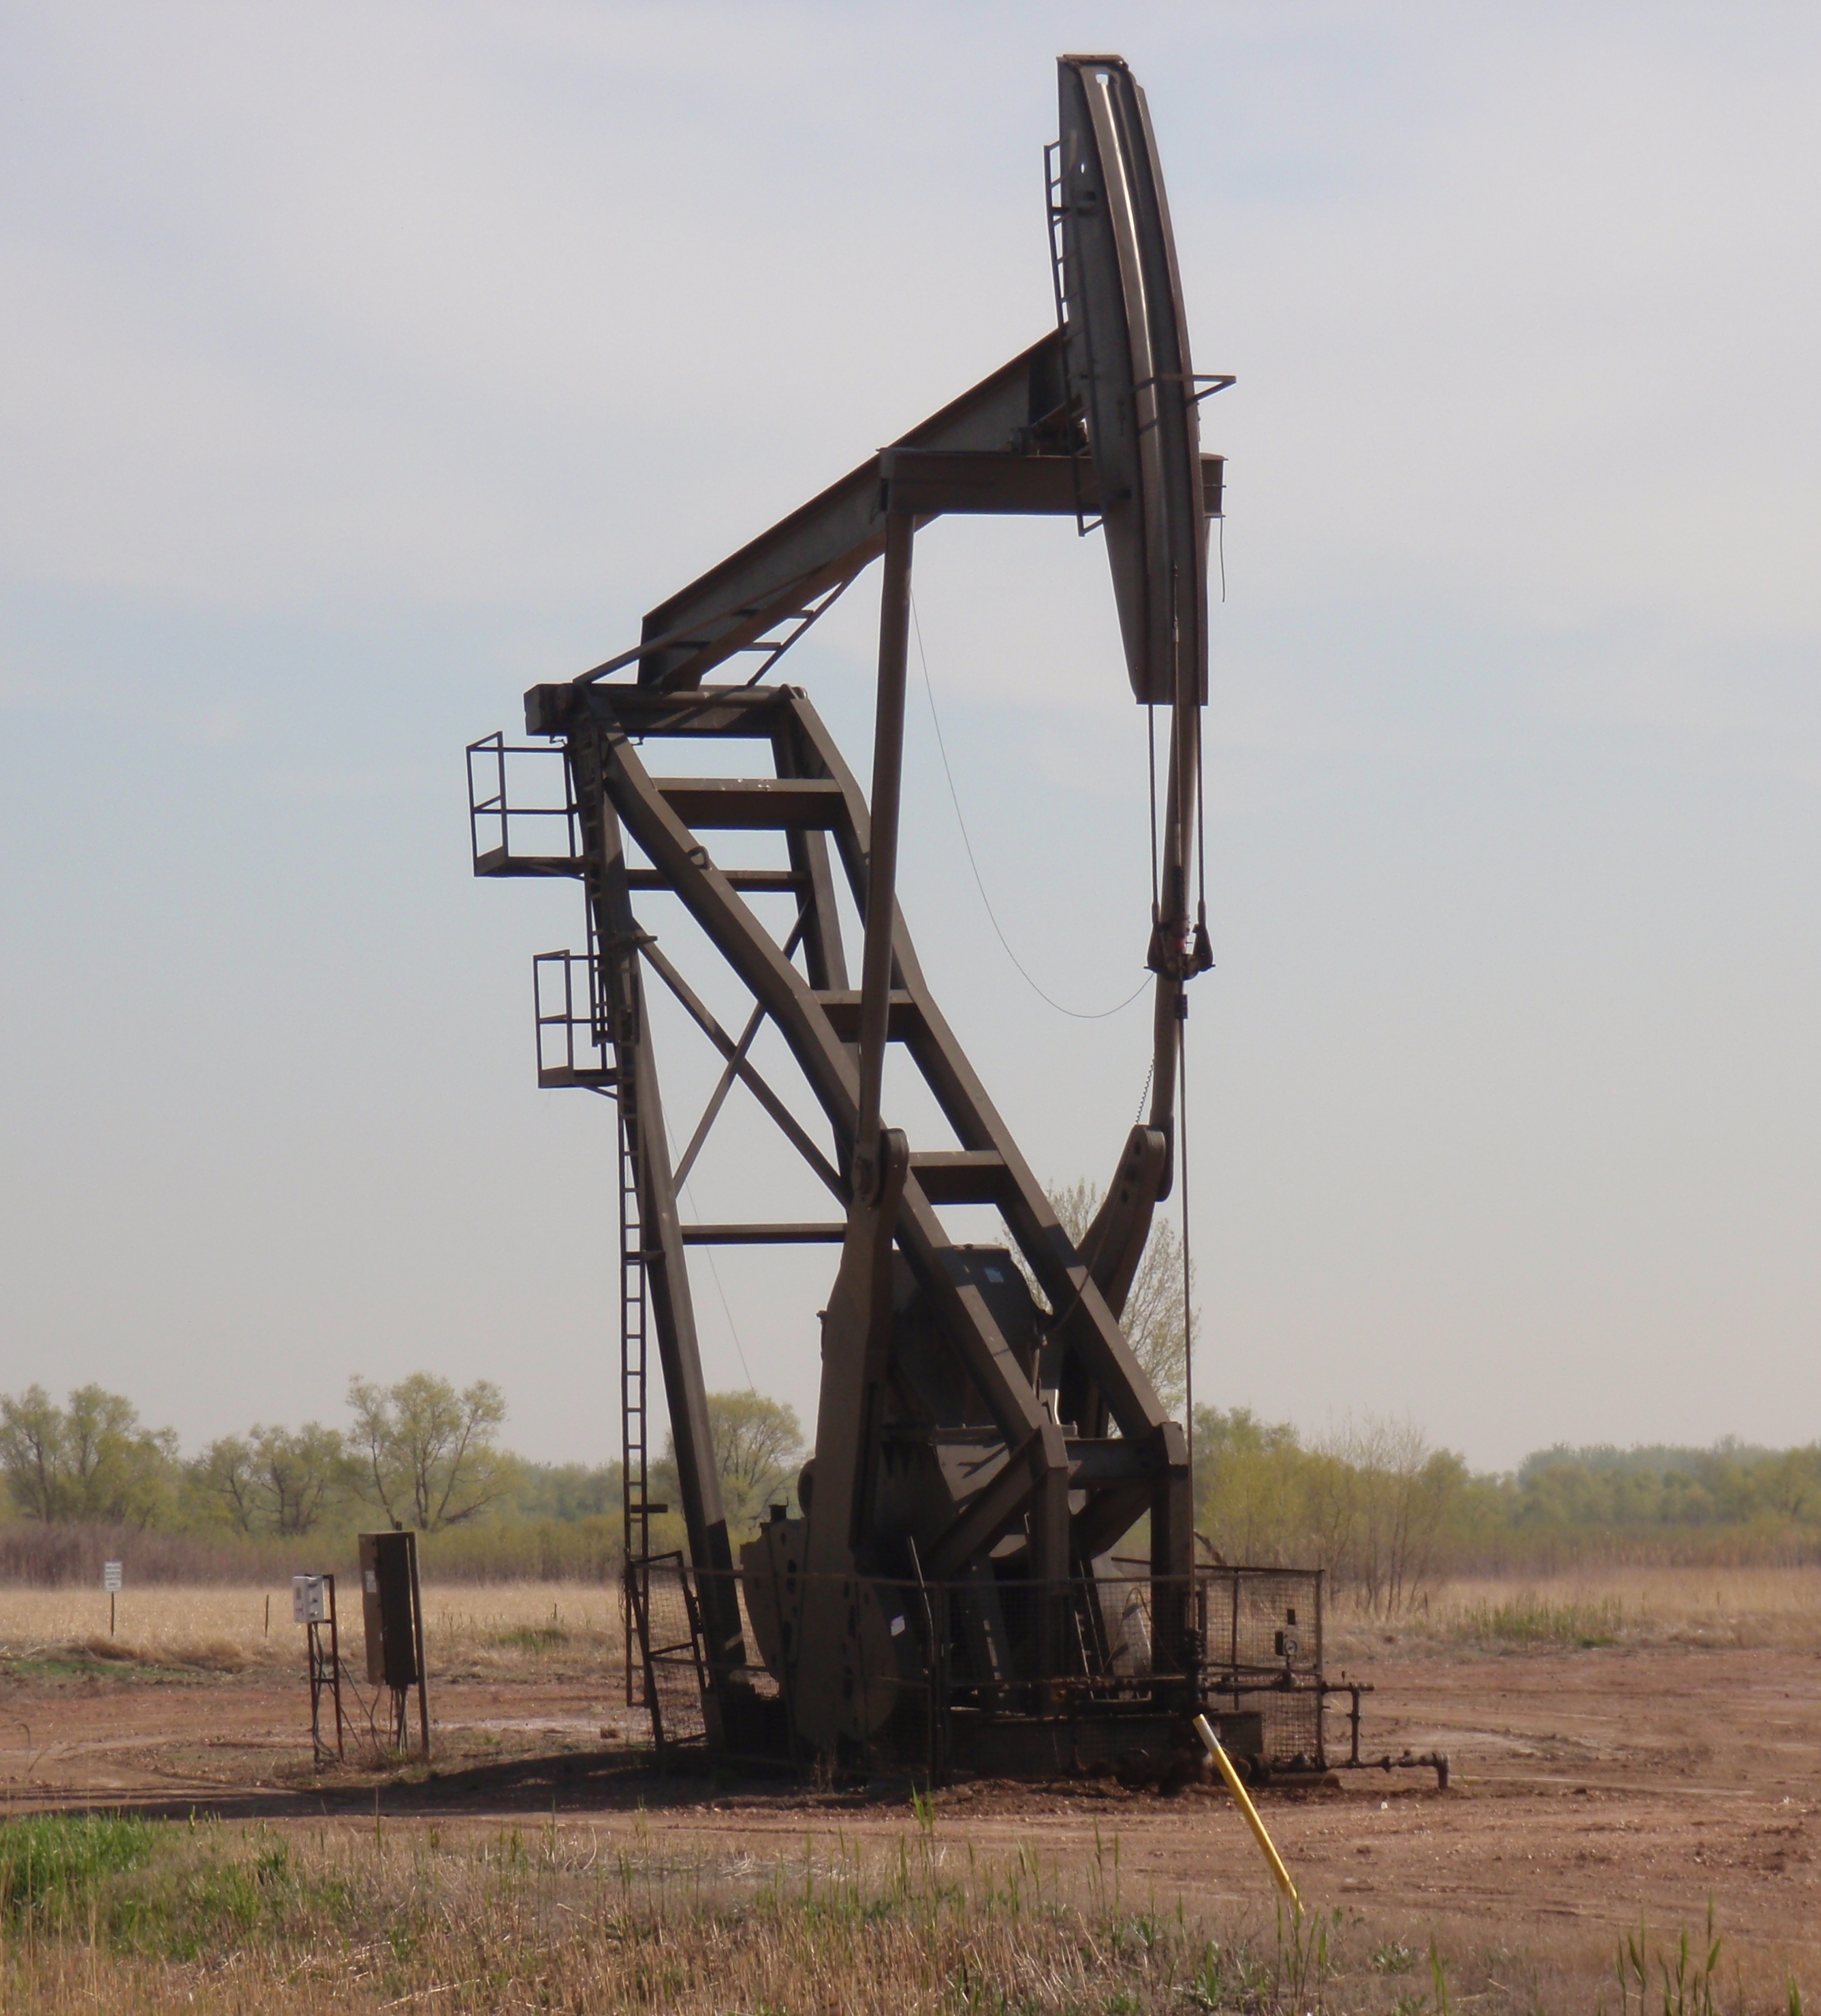 Lonely pump jack in field along side road to shooting range south of Williston. May 2015 photo by James Ulvog.